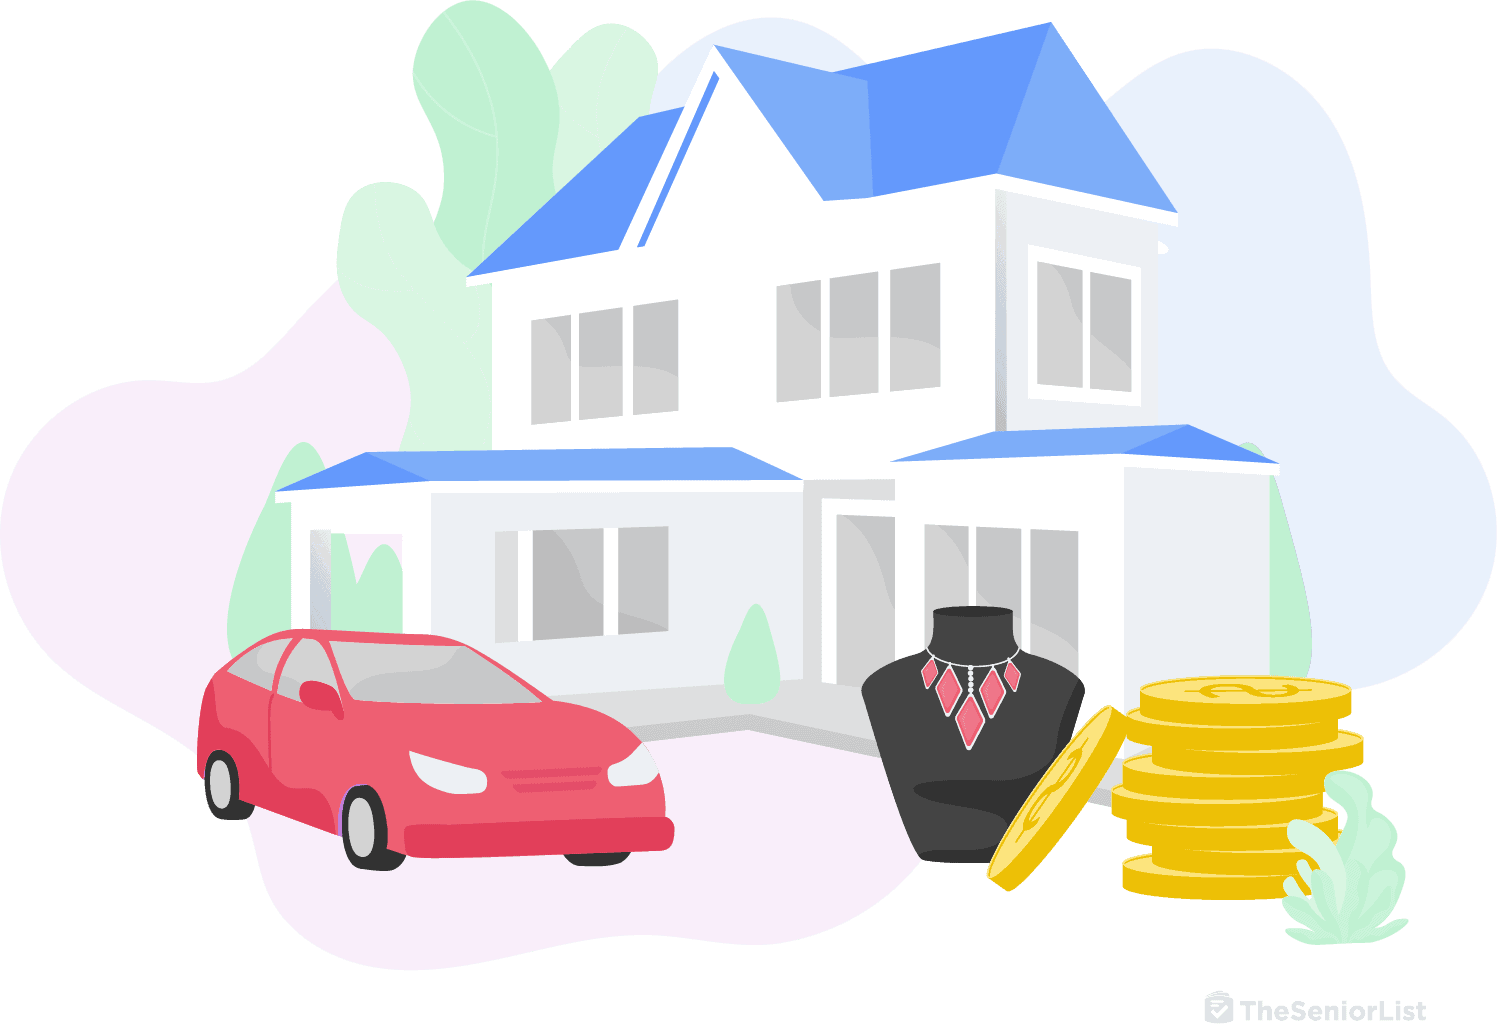 Examples of estate assets can include houses, cars, jewelry, and money.